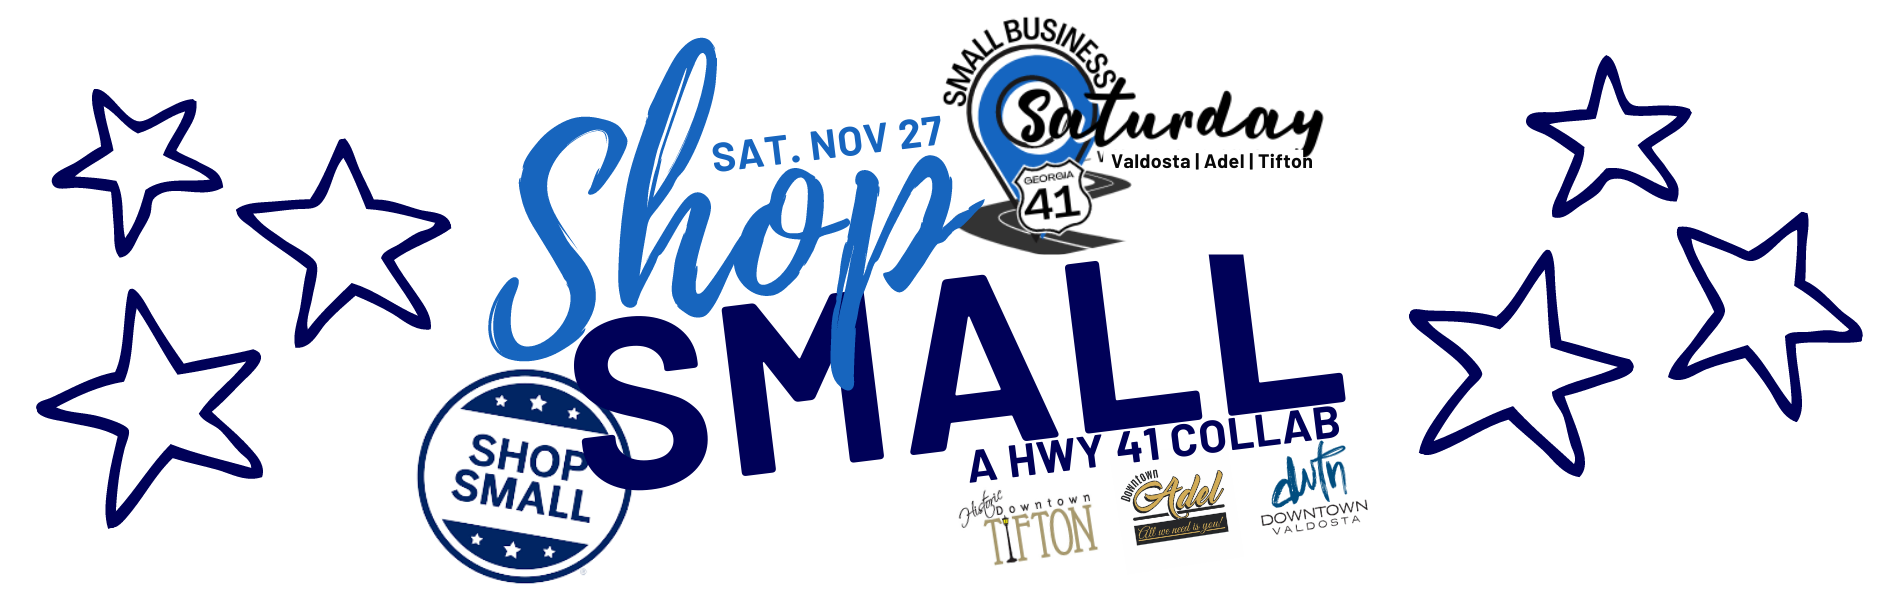 Small Business Saturday HWY 41 Collab